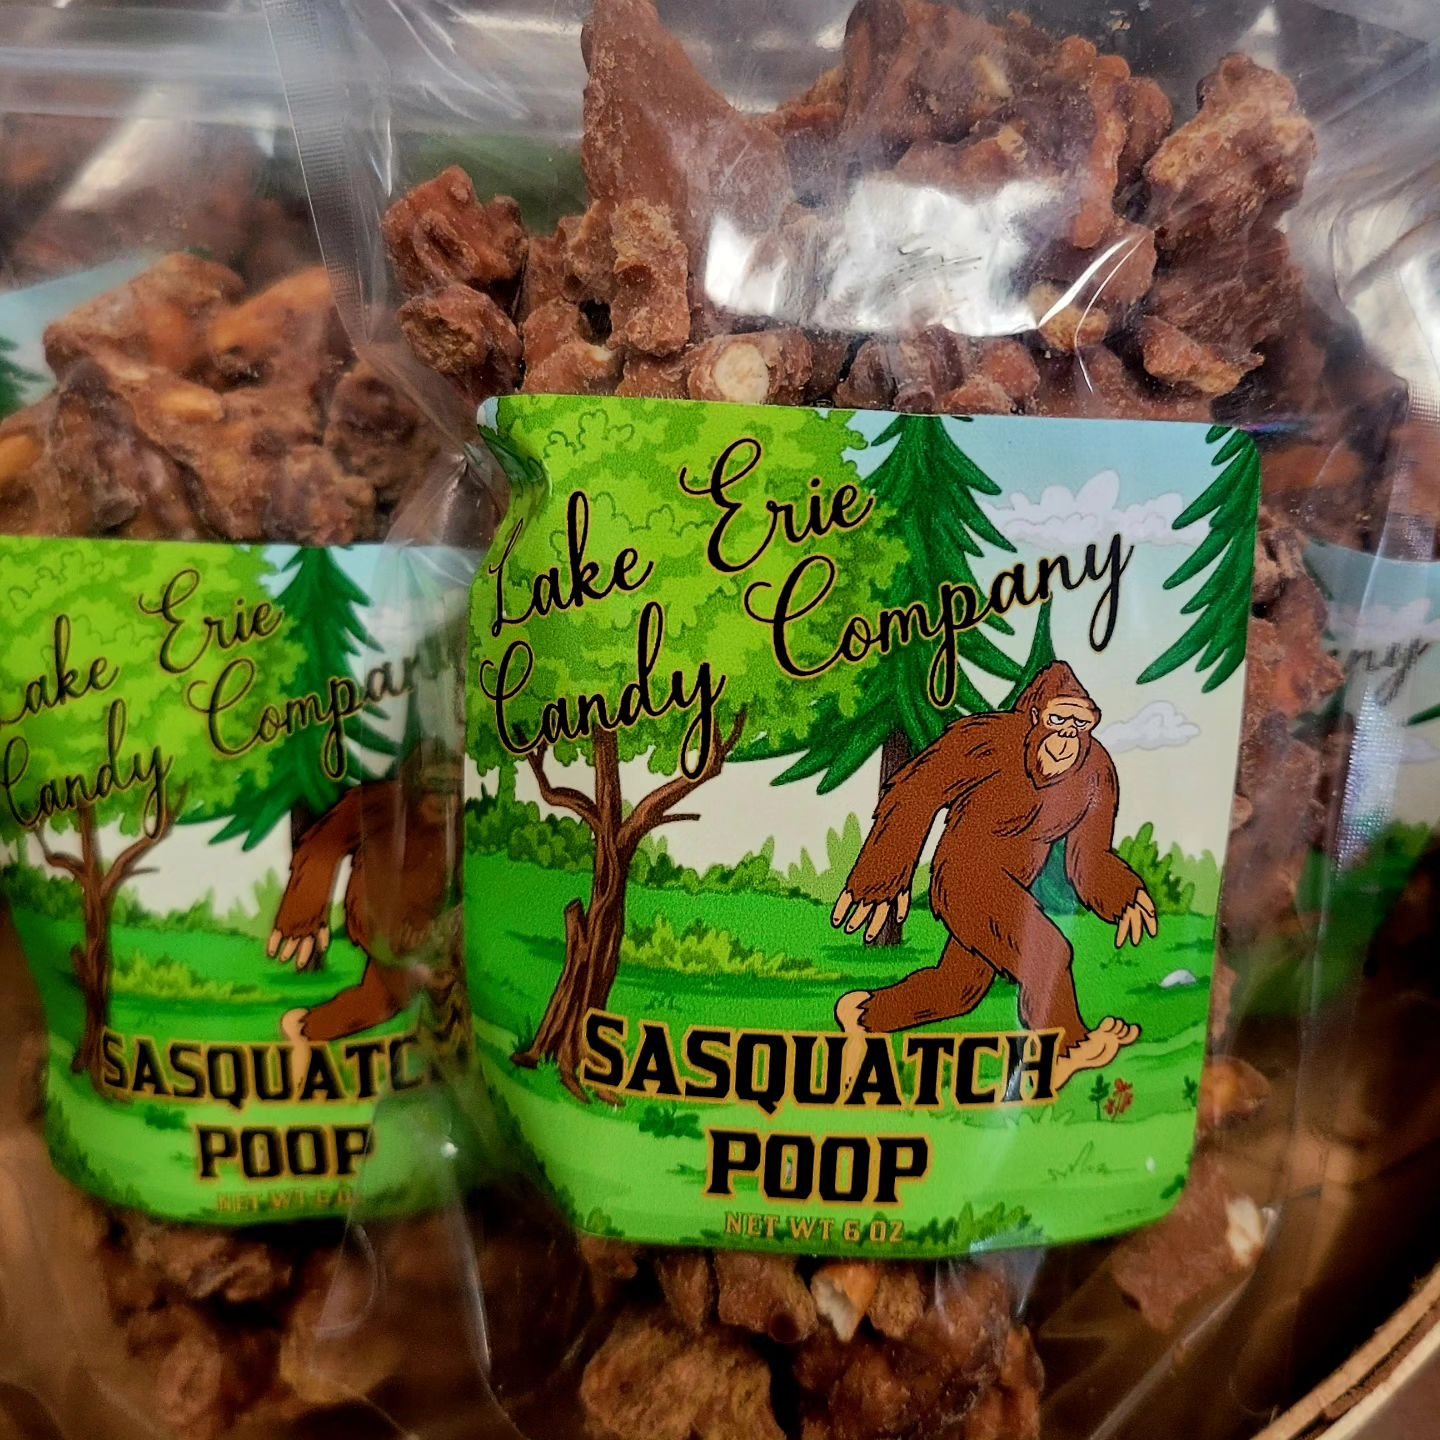 Today's employee candy pick of the day is from Greg! When he isn't eating candy, Greg is a co-owner of LECC. His favorite candy is Sasquatch Poop! These treats are chocolate covered peanut butter &amp; pretzel clusters with Golden Graham's cereal, to